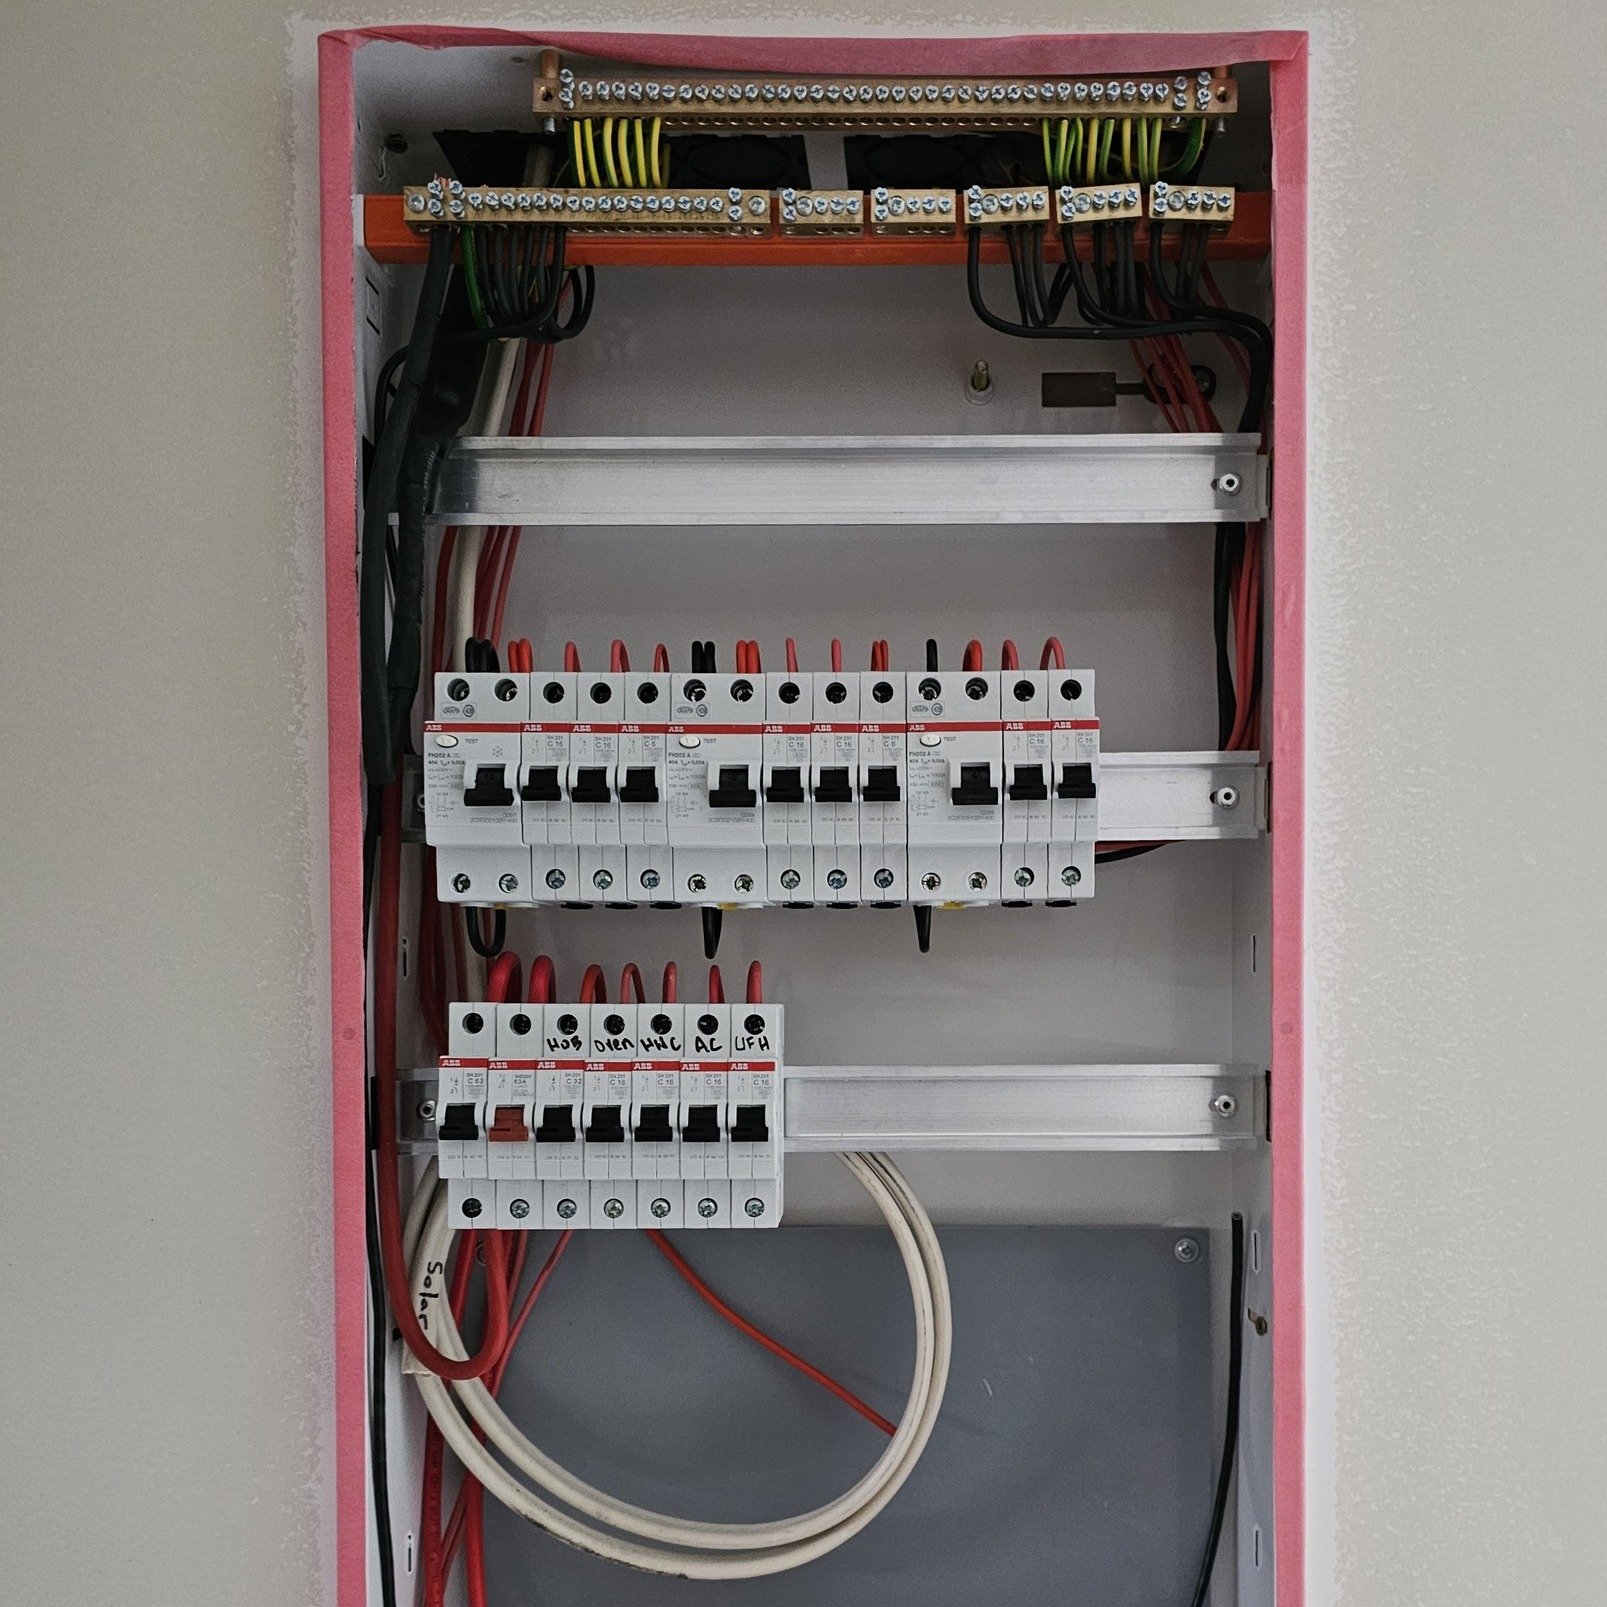 Been doing a whole lot of switchboard work recently for a few townhouse developments we've been helping out on.